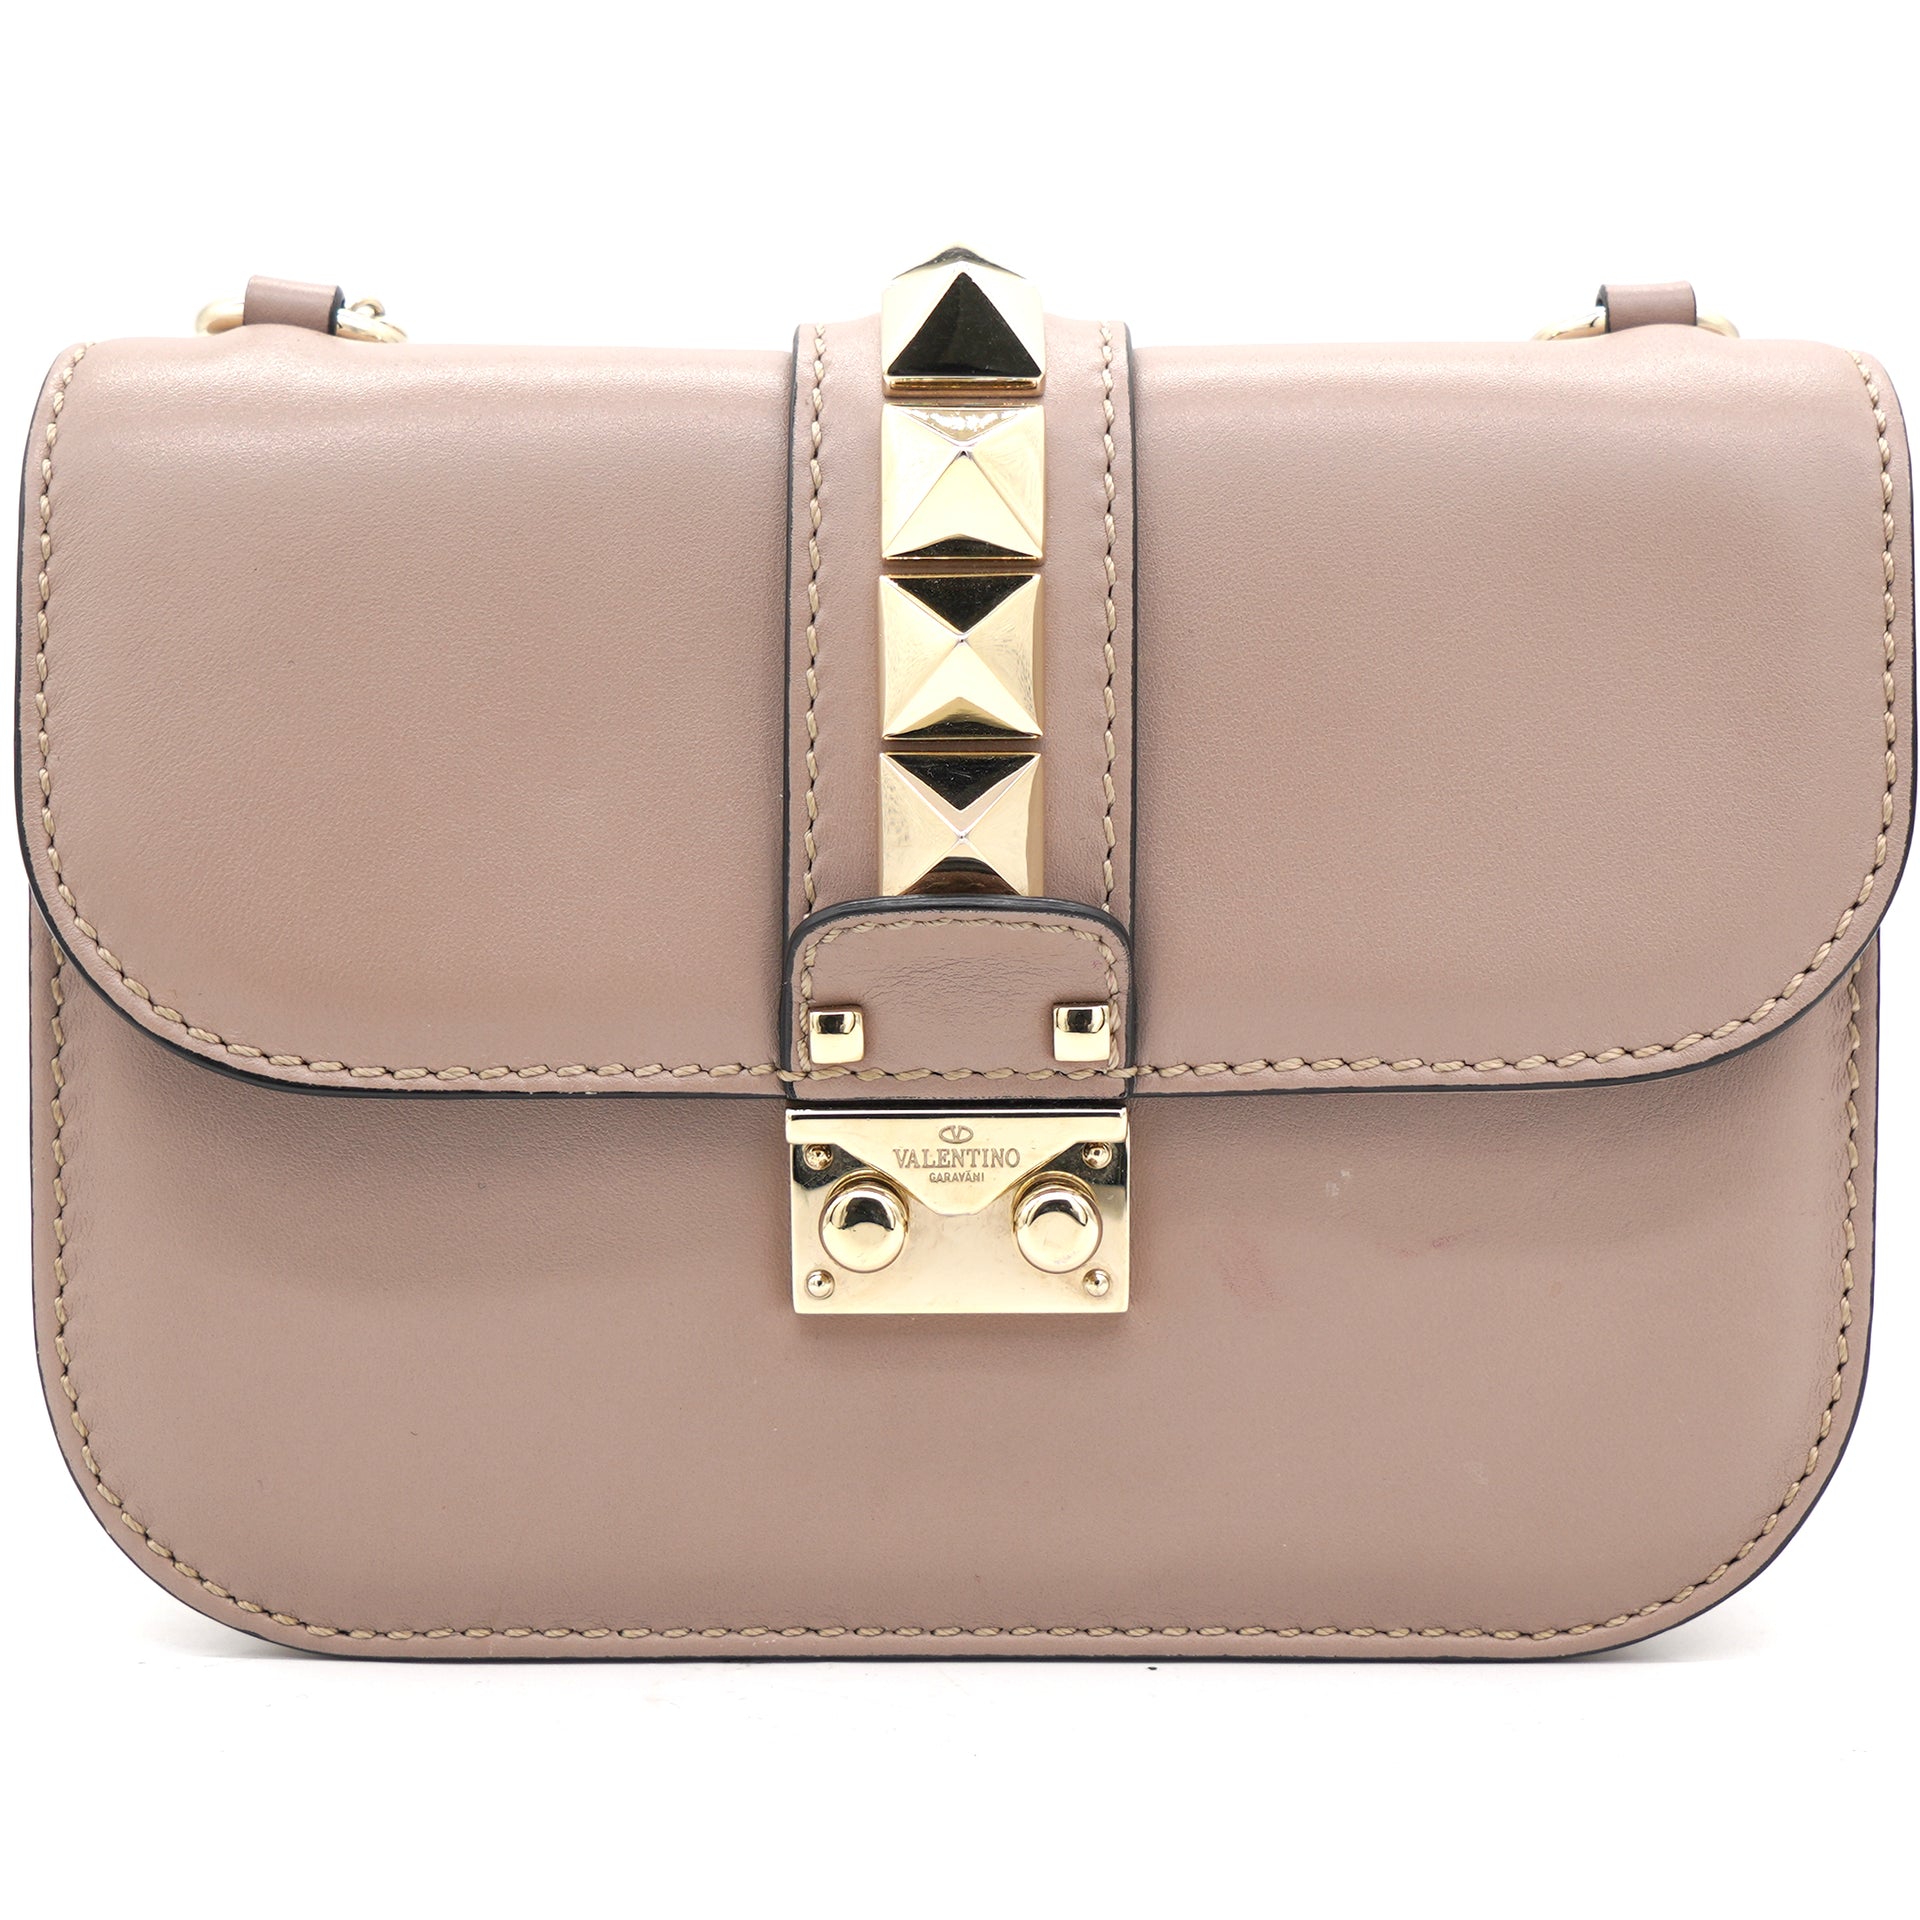 Valentino Shoulder Bags for Women, Authenticity Guaranteed